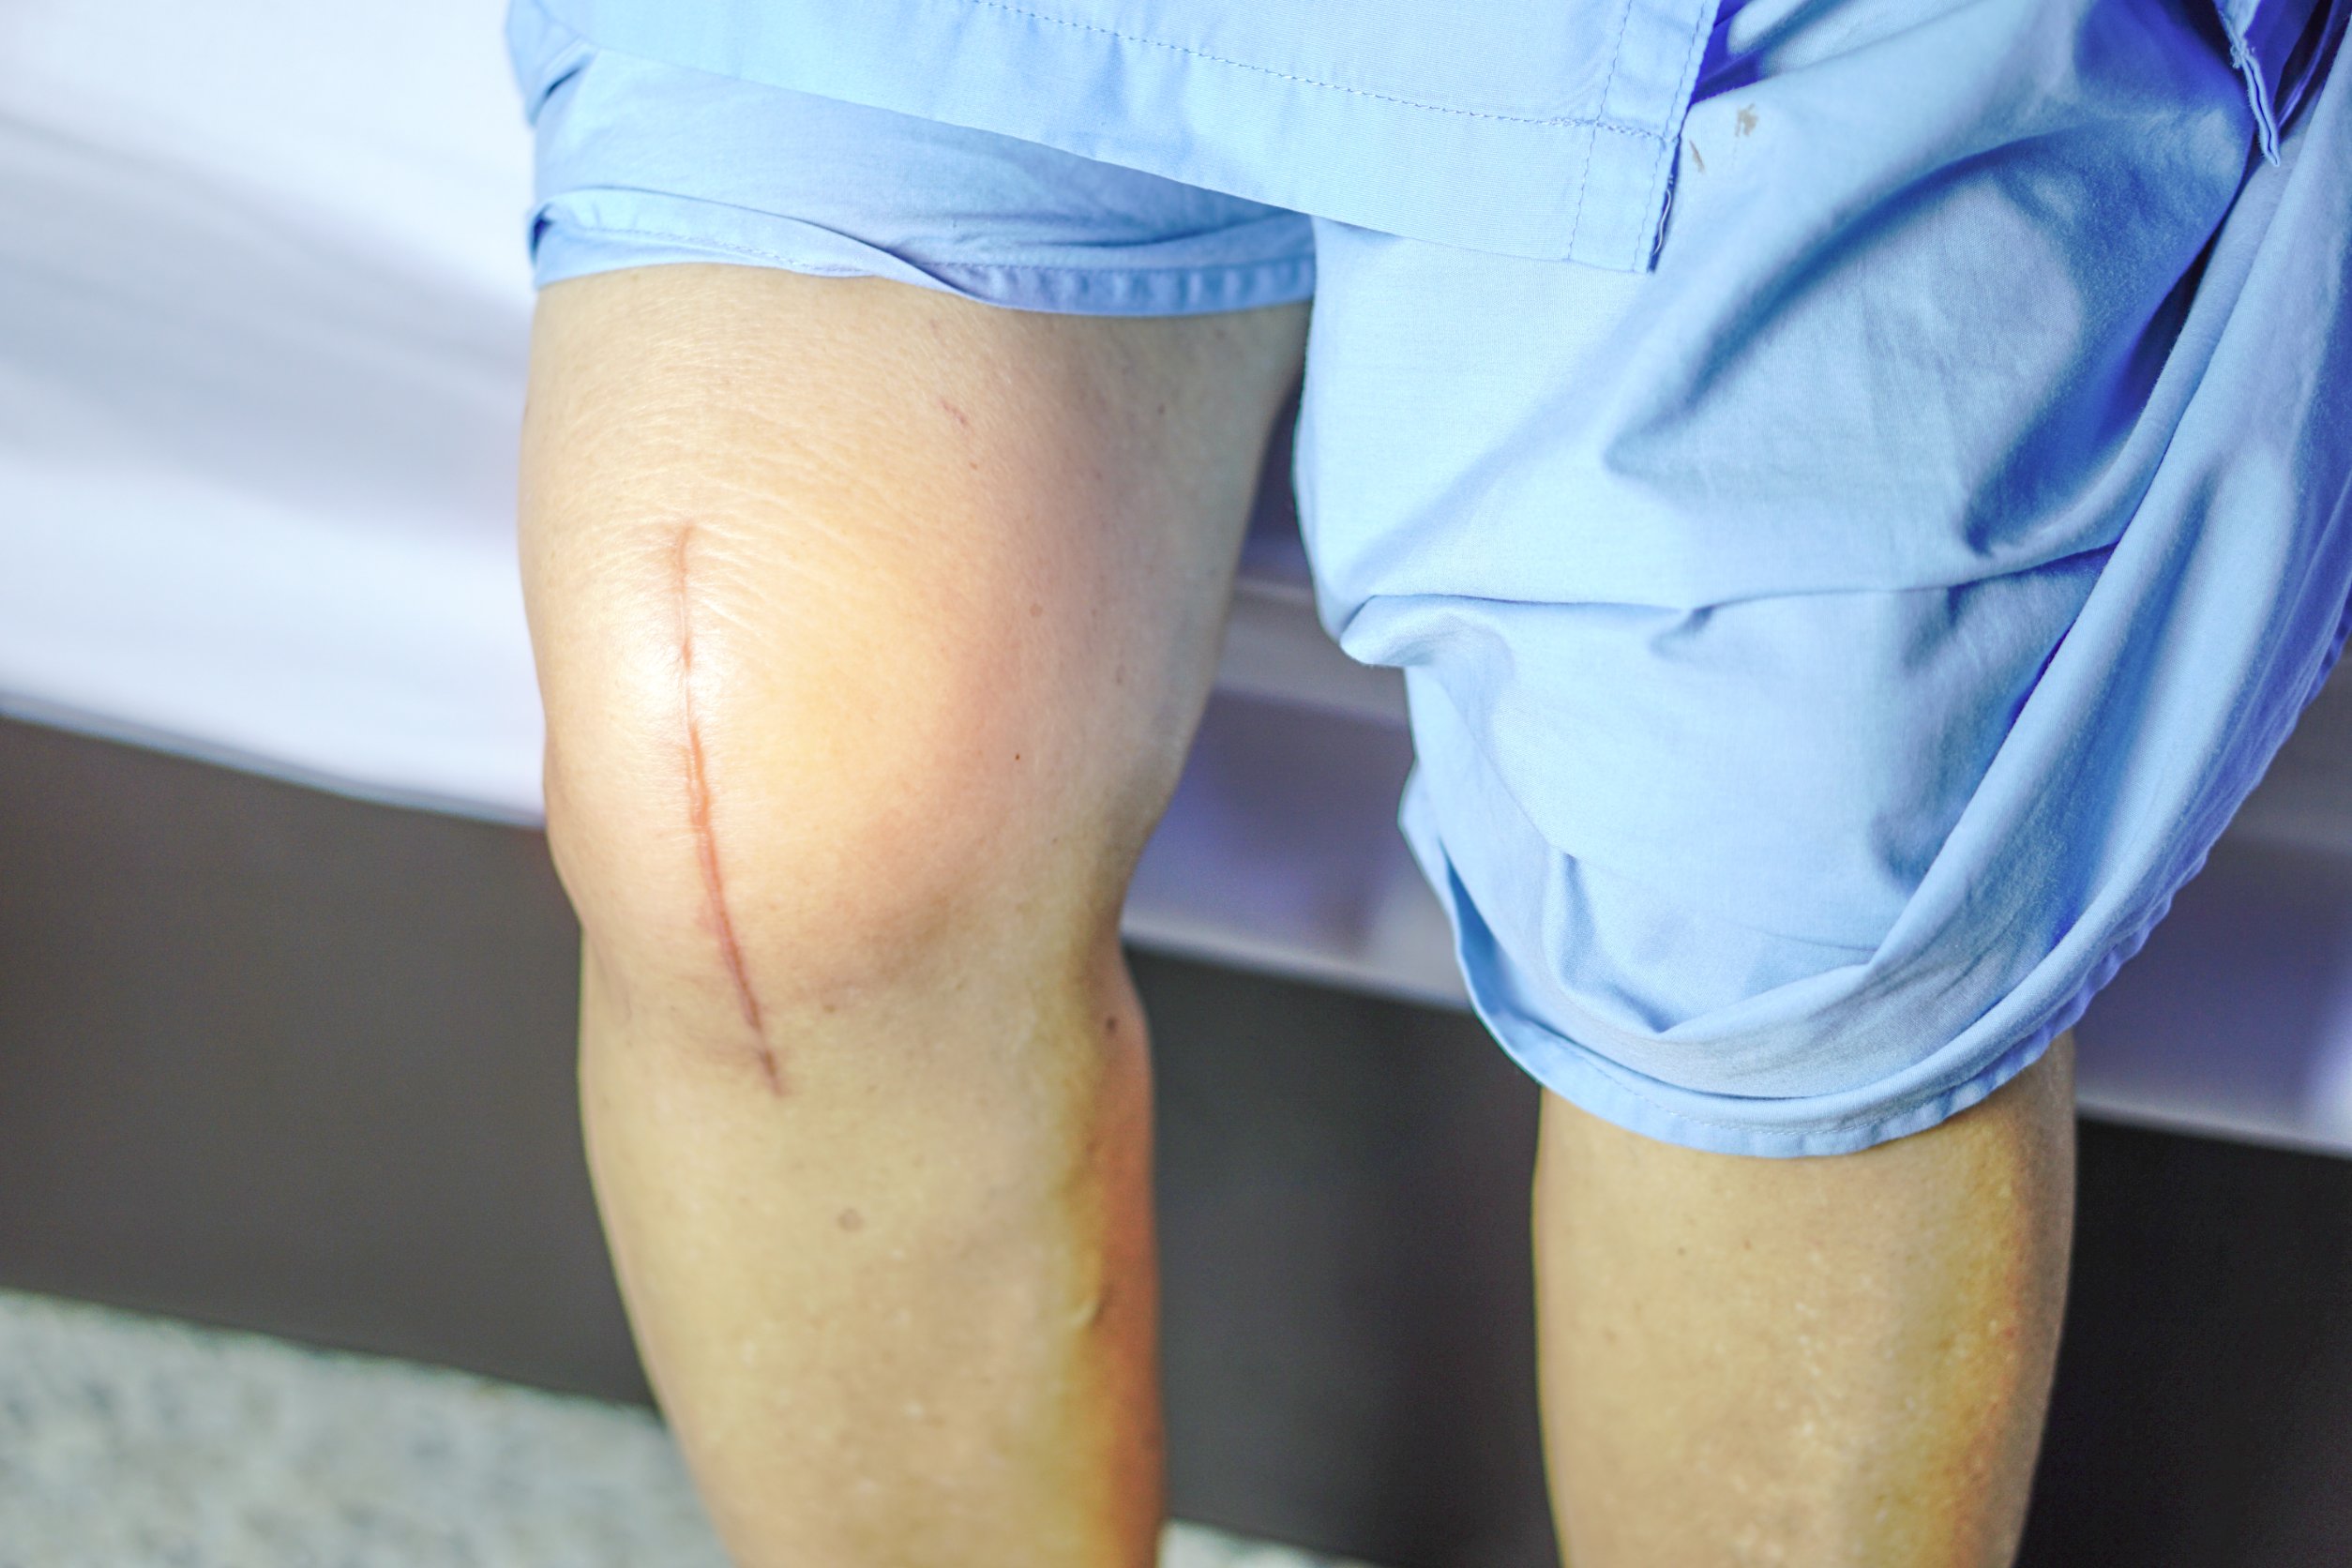 Will Knee Replacement Get Rid Of Arthritis?